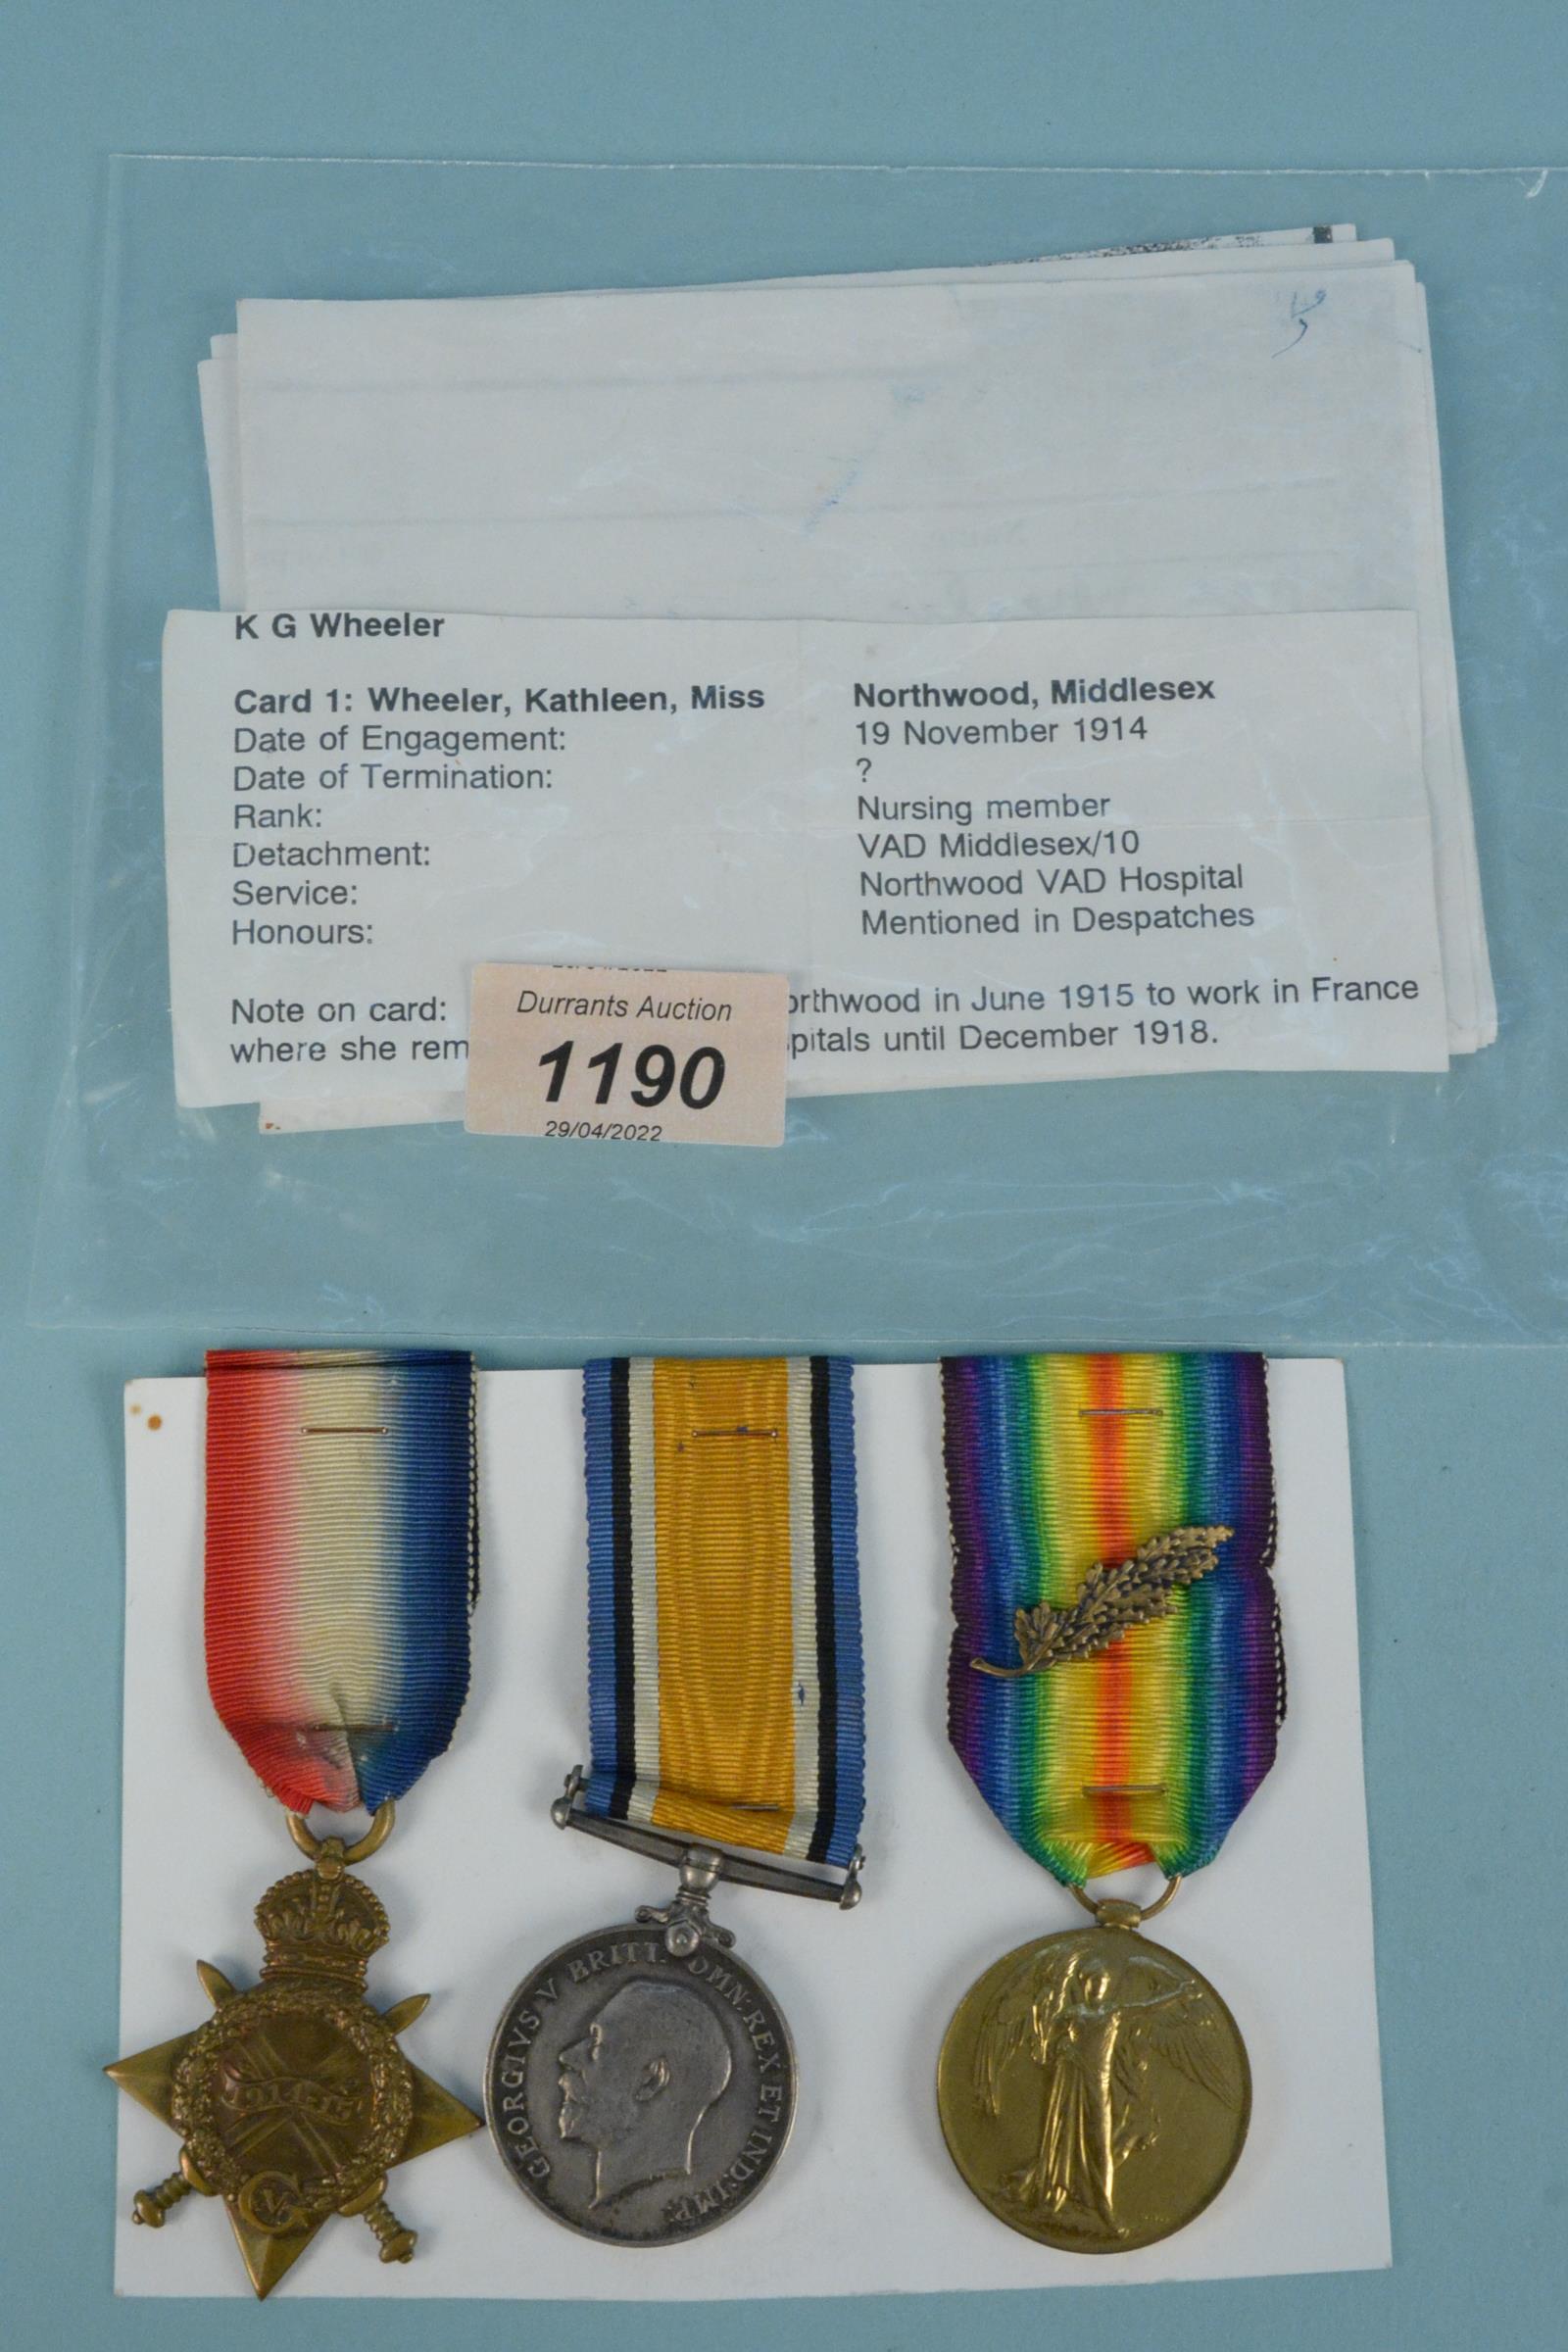 A WWI 14/15 Star trio, Star to K.G.Wheeler B.R.C. & ST.J.J. with pair to K.G.Wheeler V.A.D.